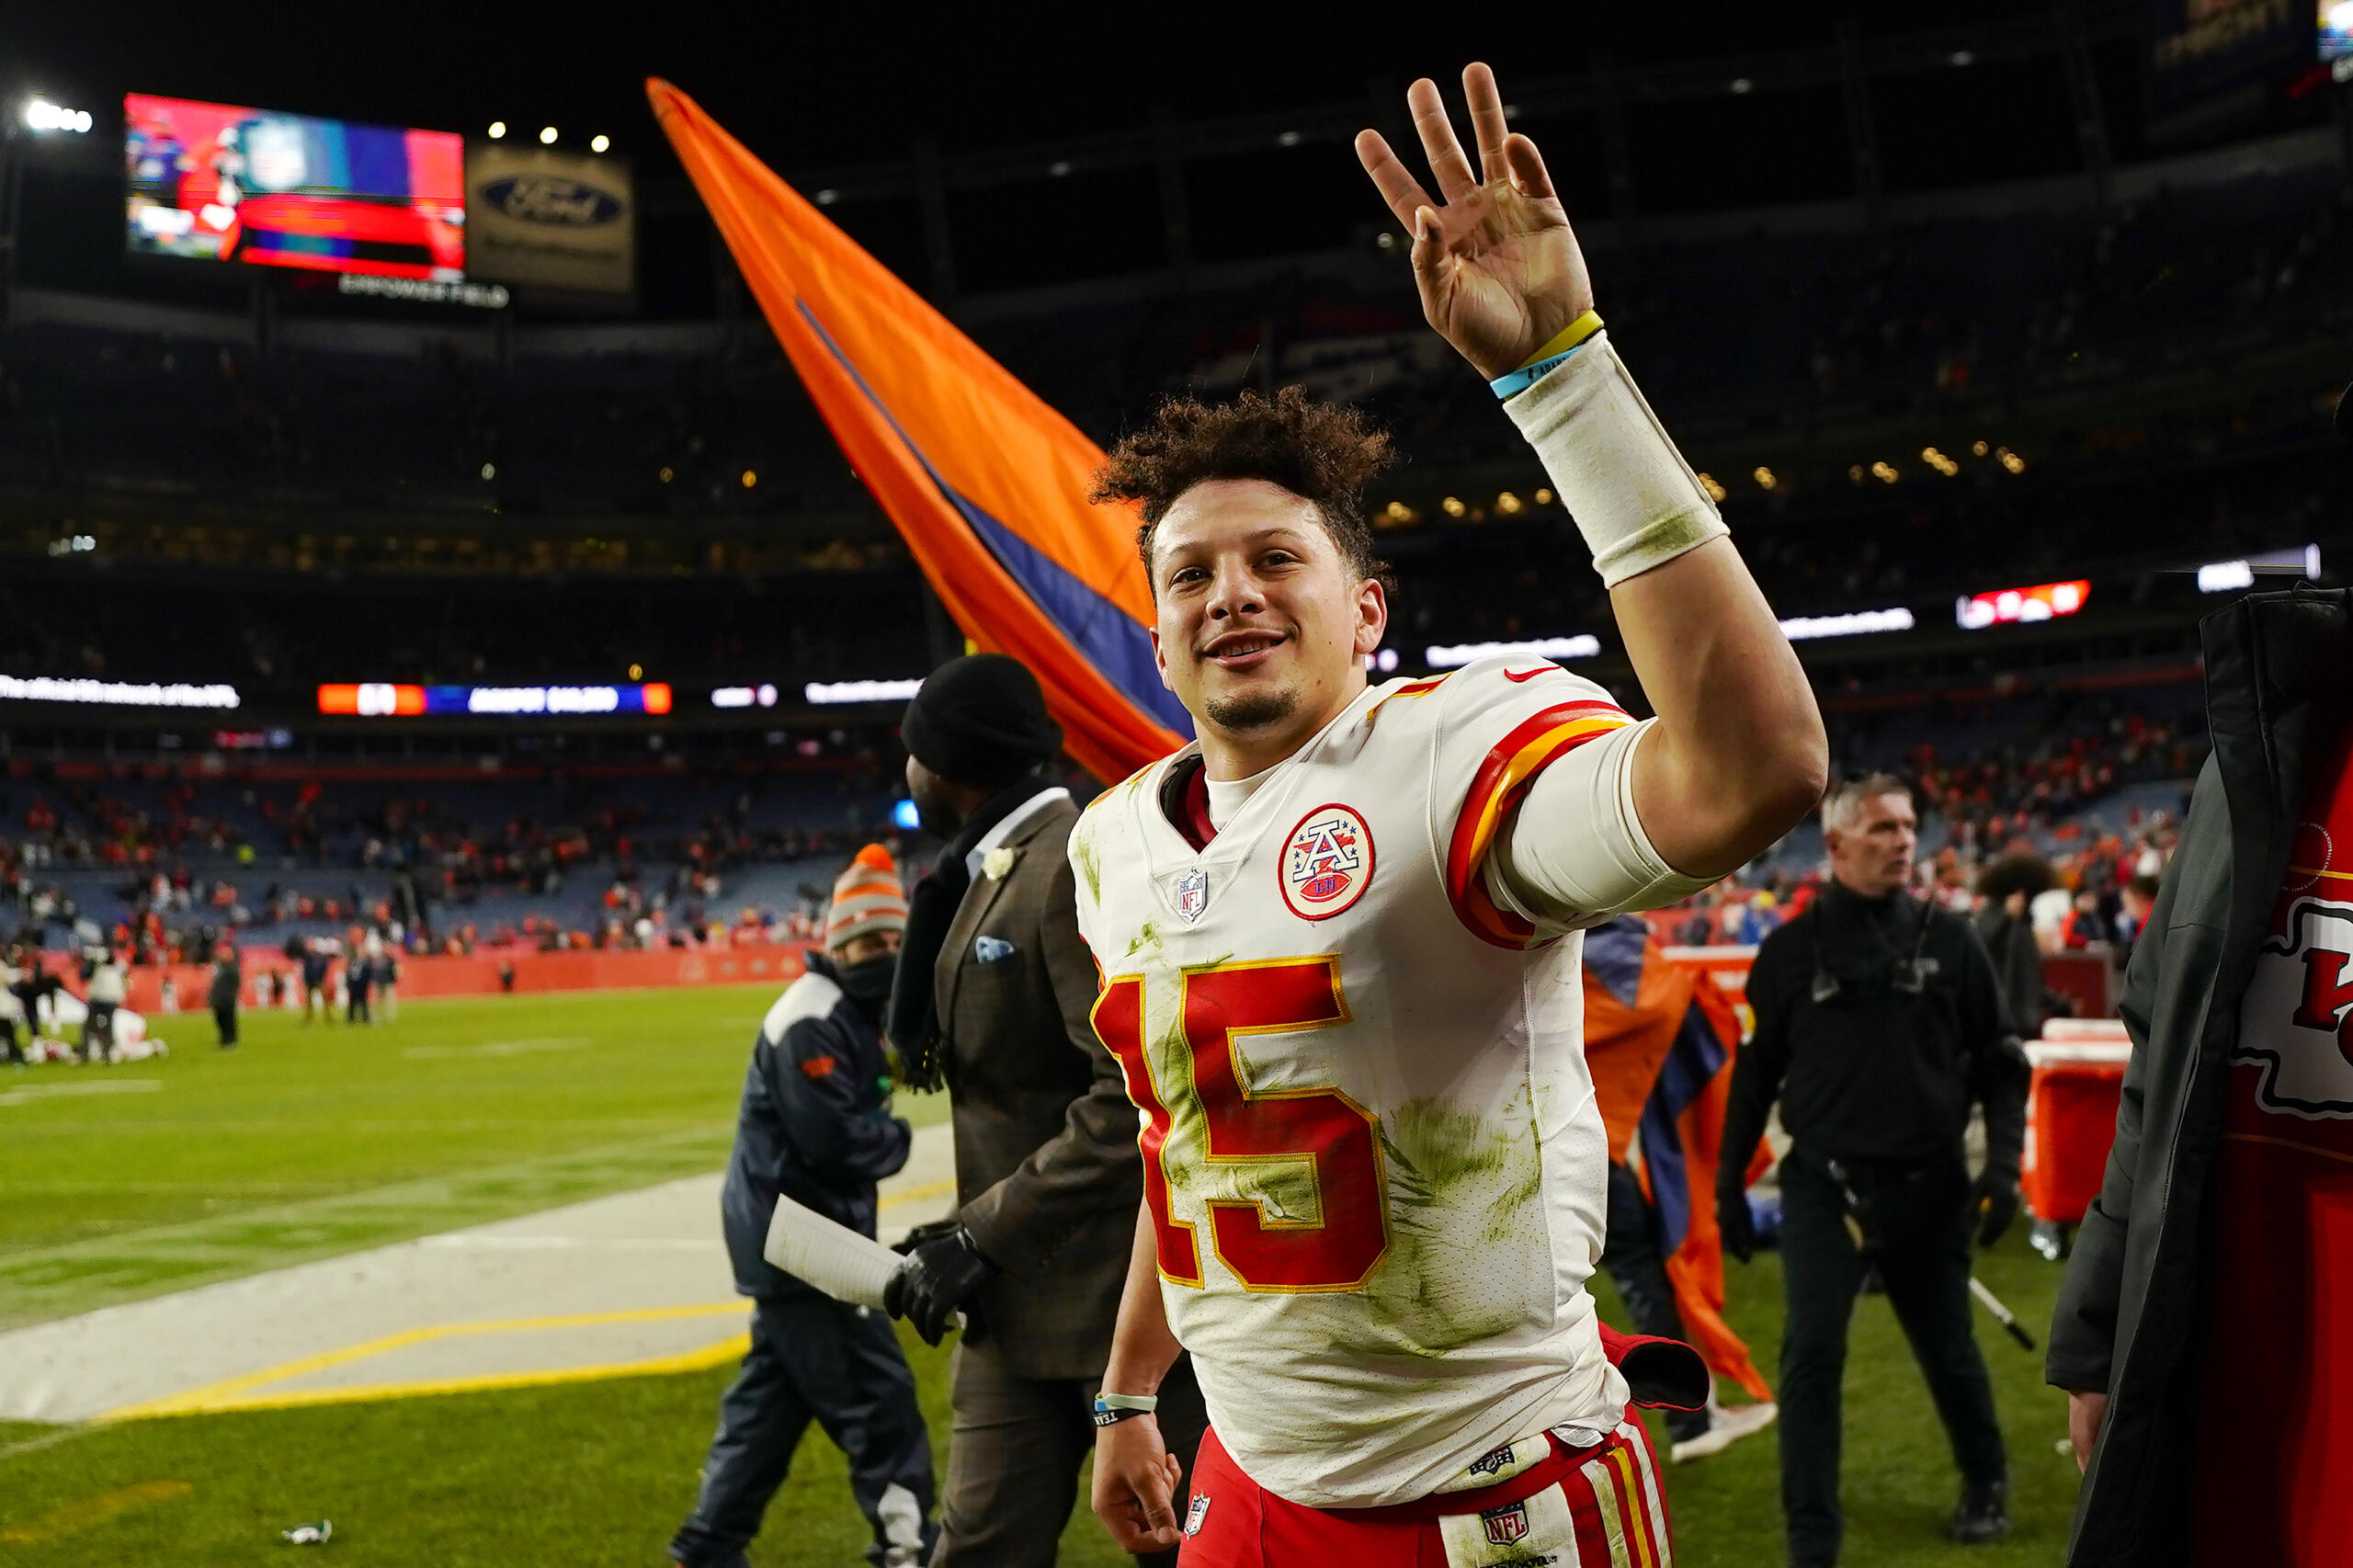 Patrick Mahomes and the Super Bowl champion Kansas City Chiefs will host the Detroit Lions on Sept. 7 to kick off the 2023 NFL season.